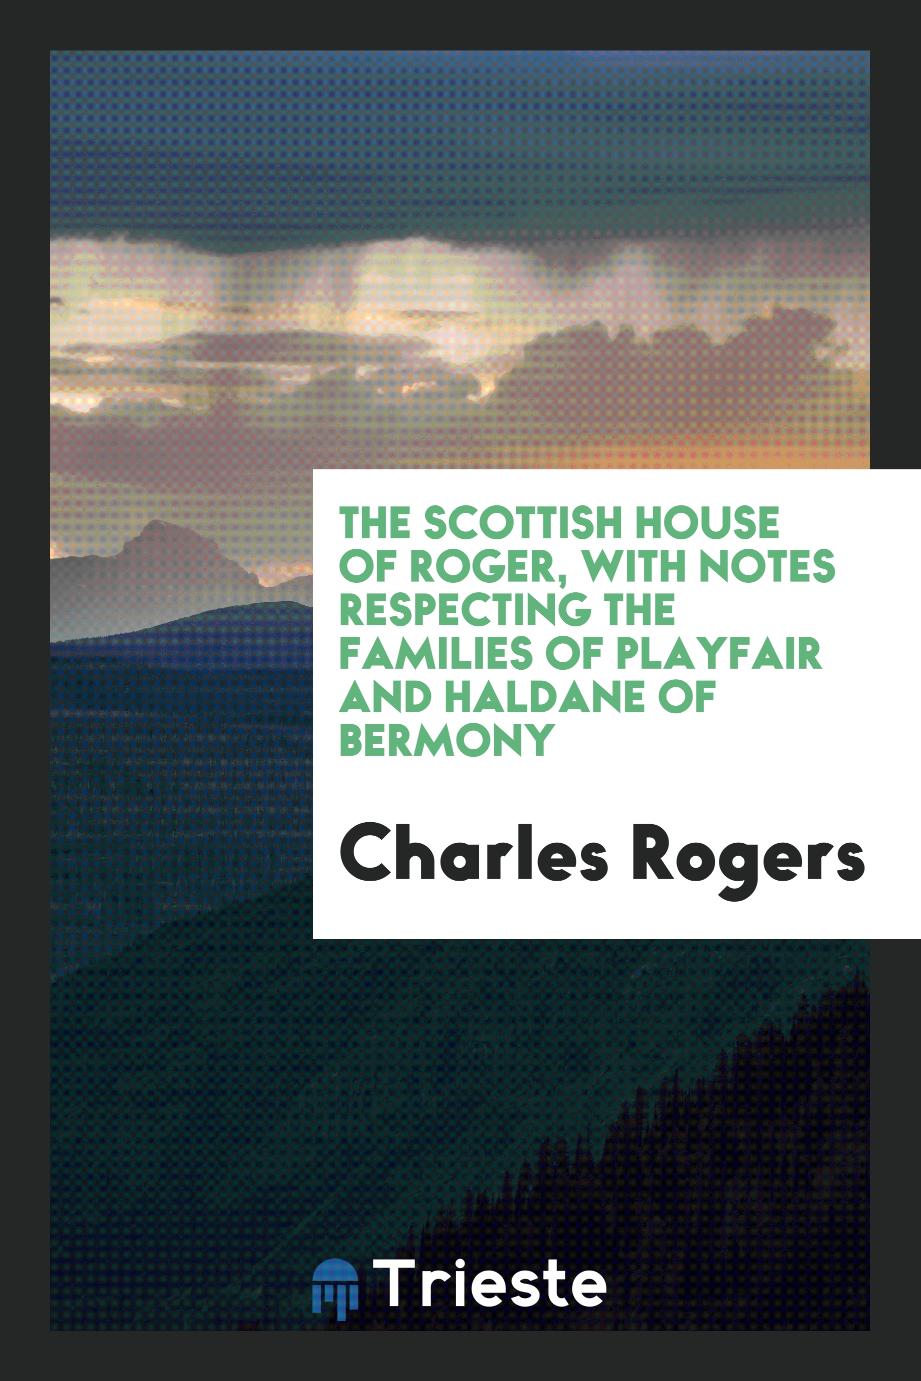 The Scottish house of Roger, with notes respecting the families of Playfair and Haldane of Bermony